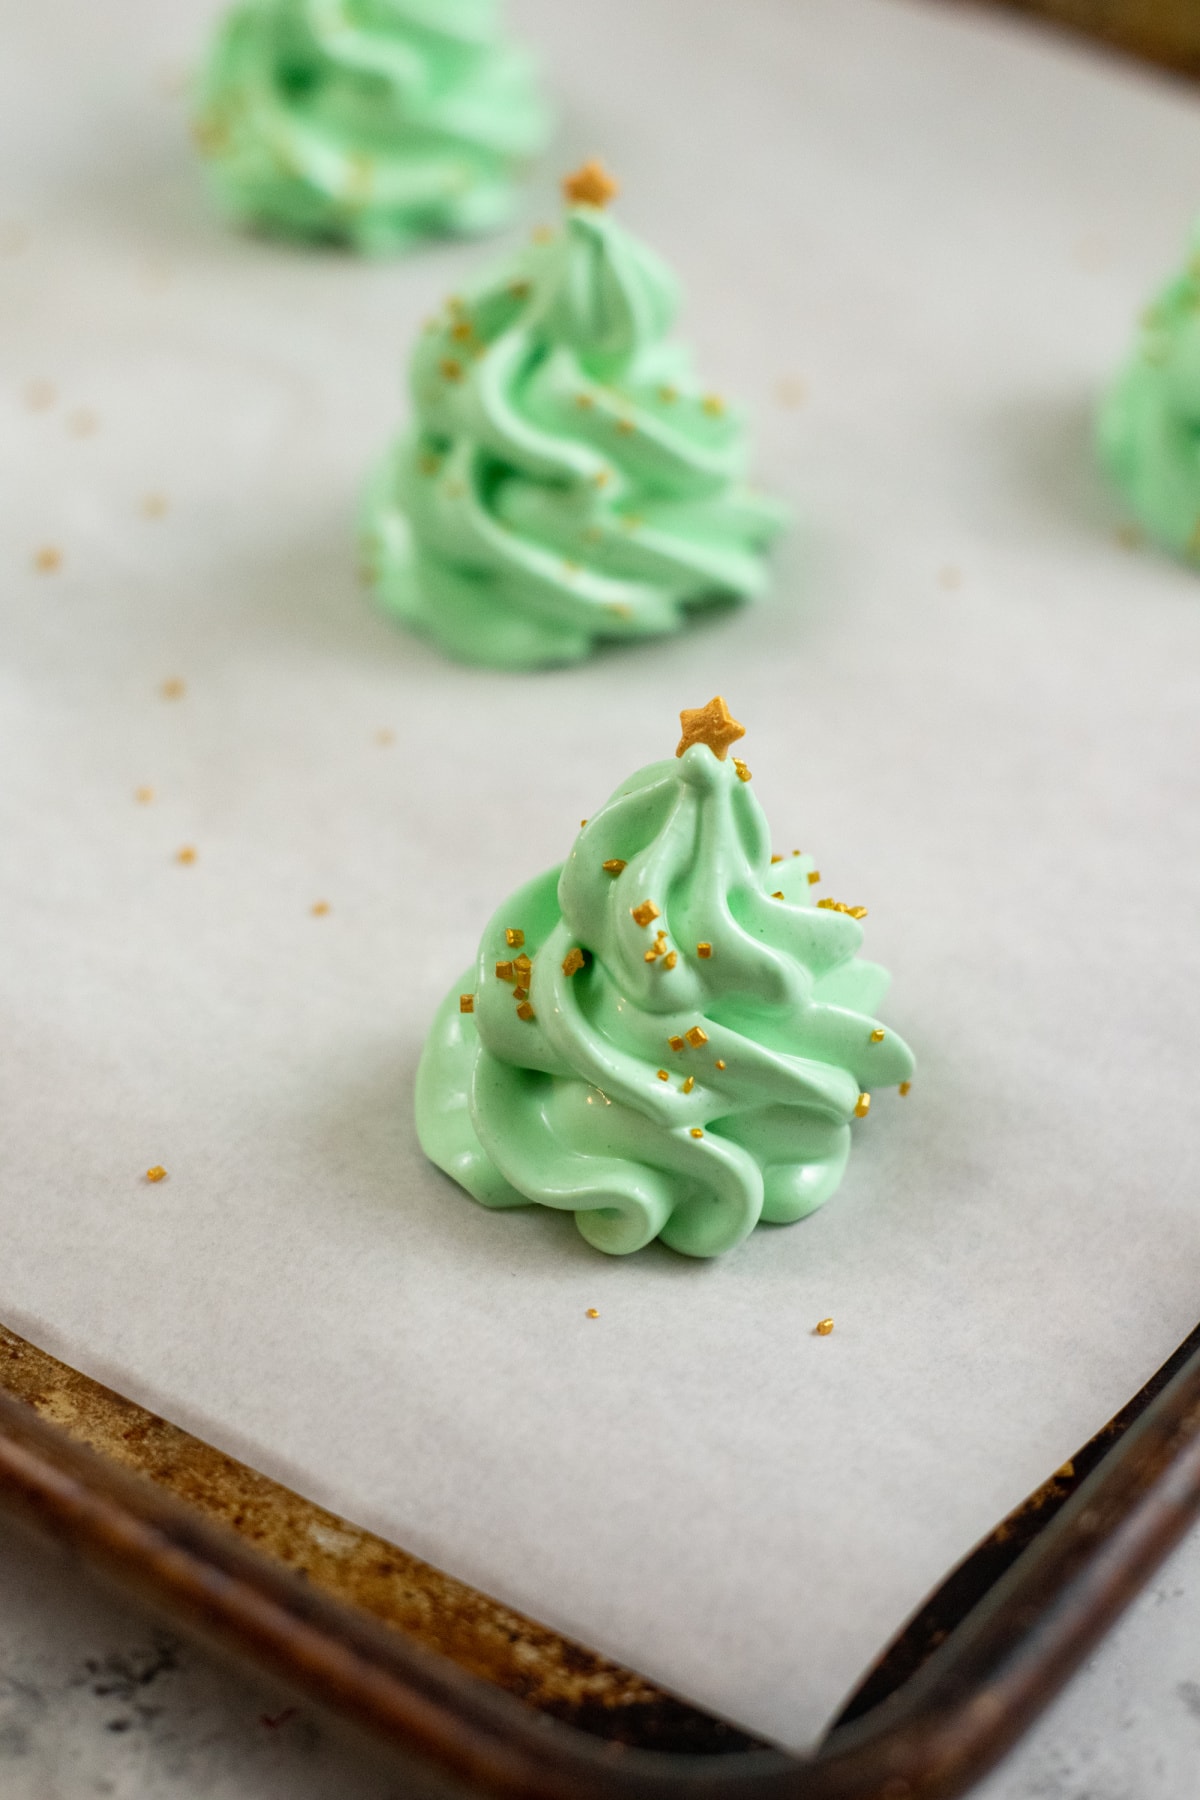 Christmas tree meringue with gold star and sprinkles